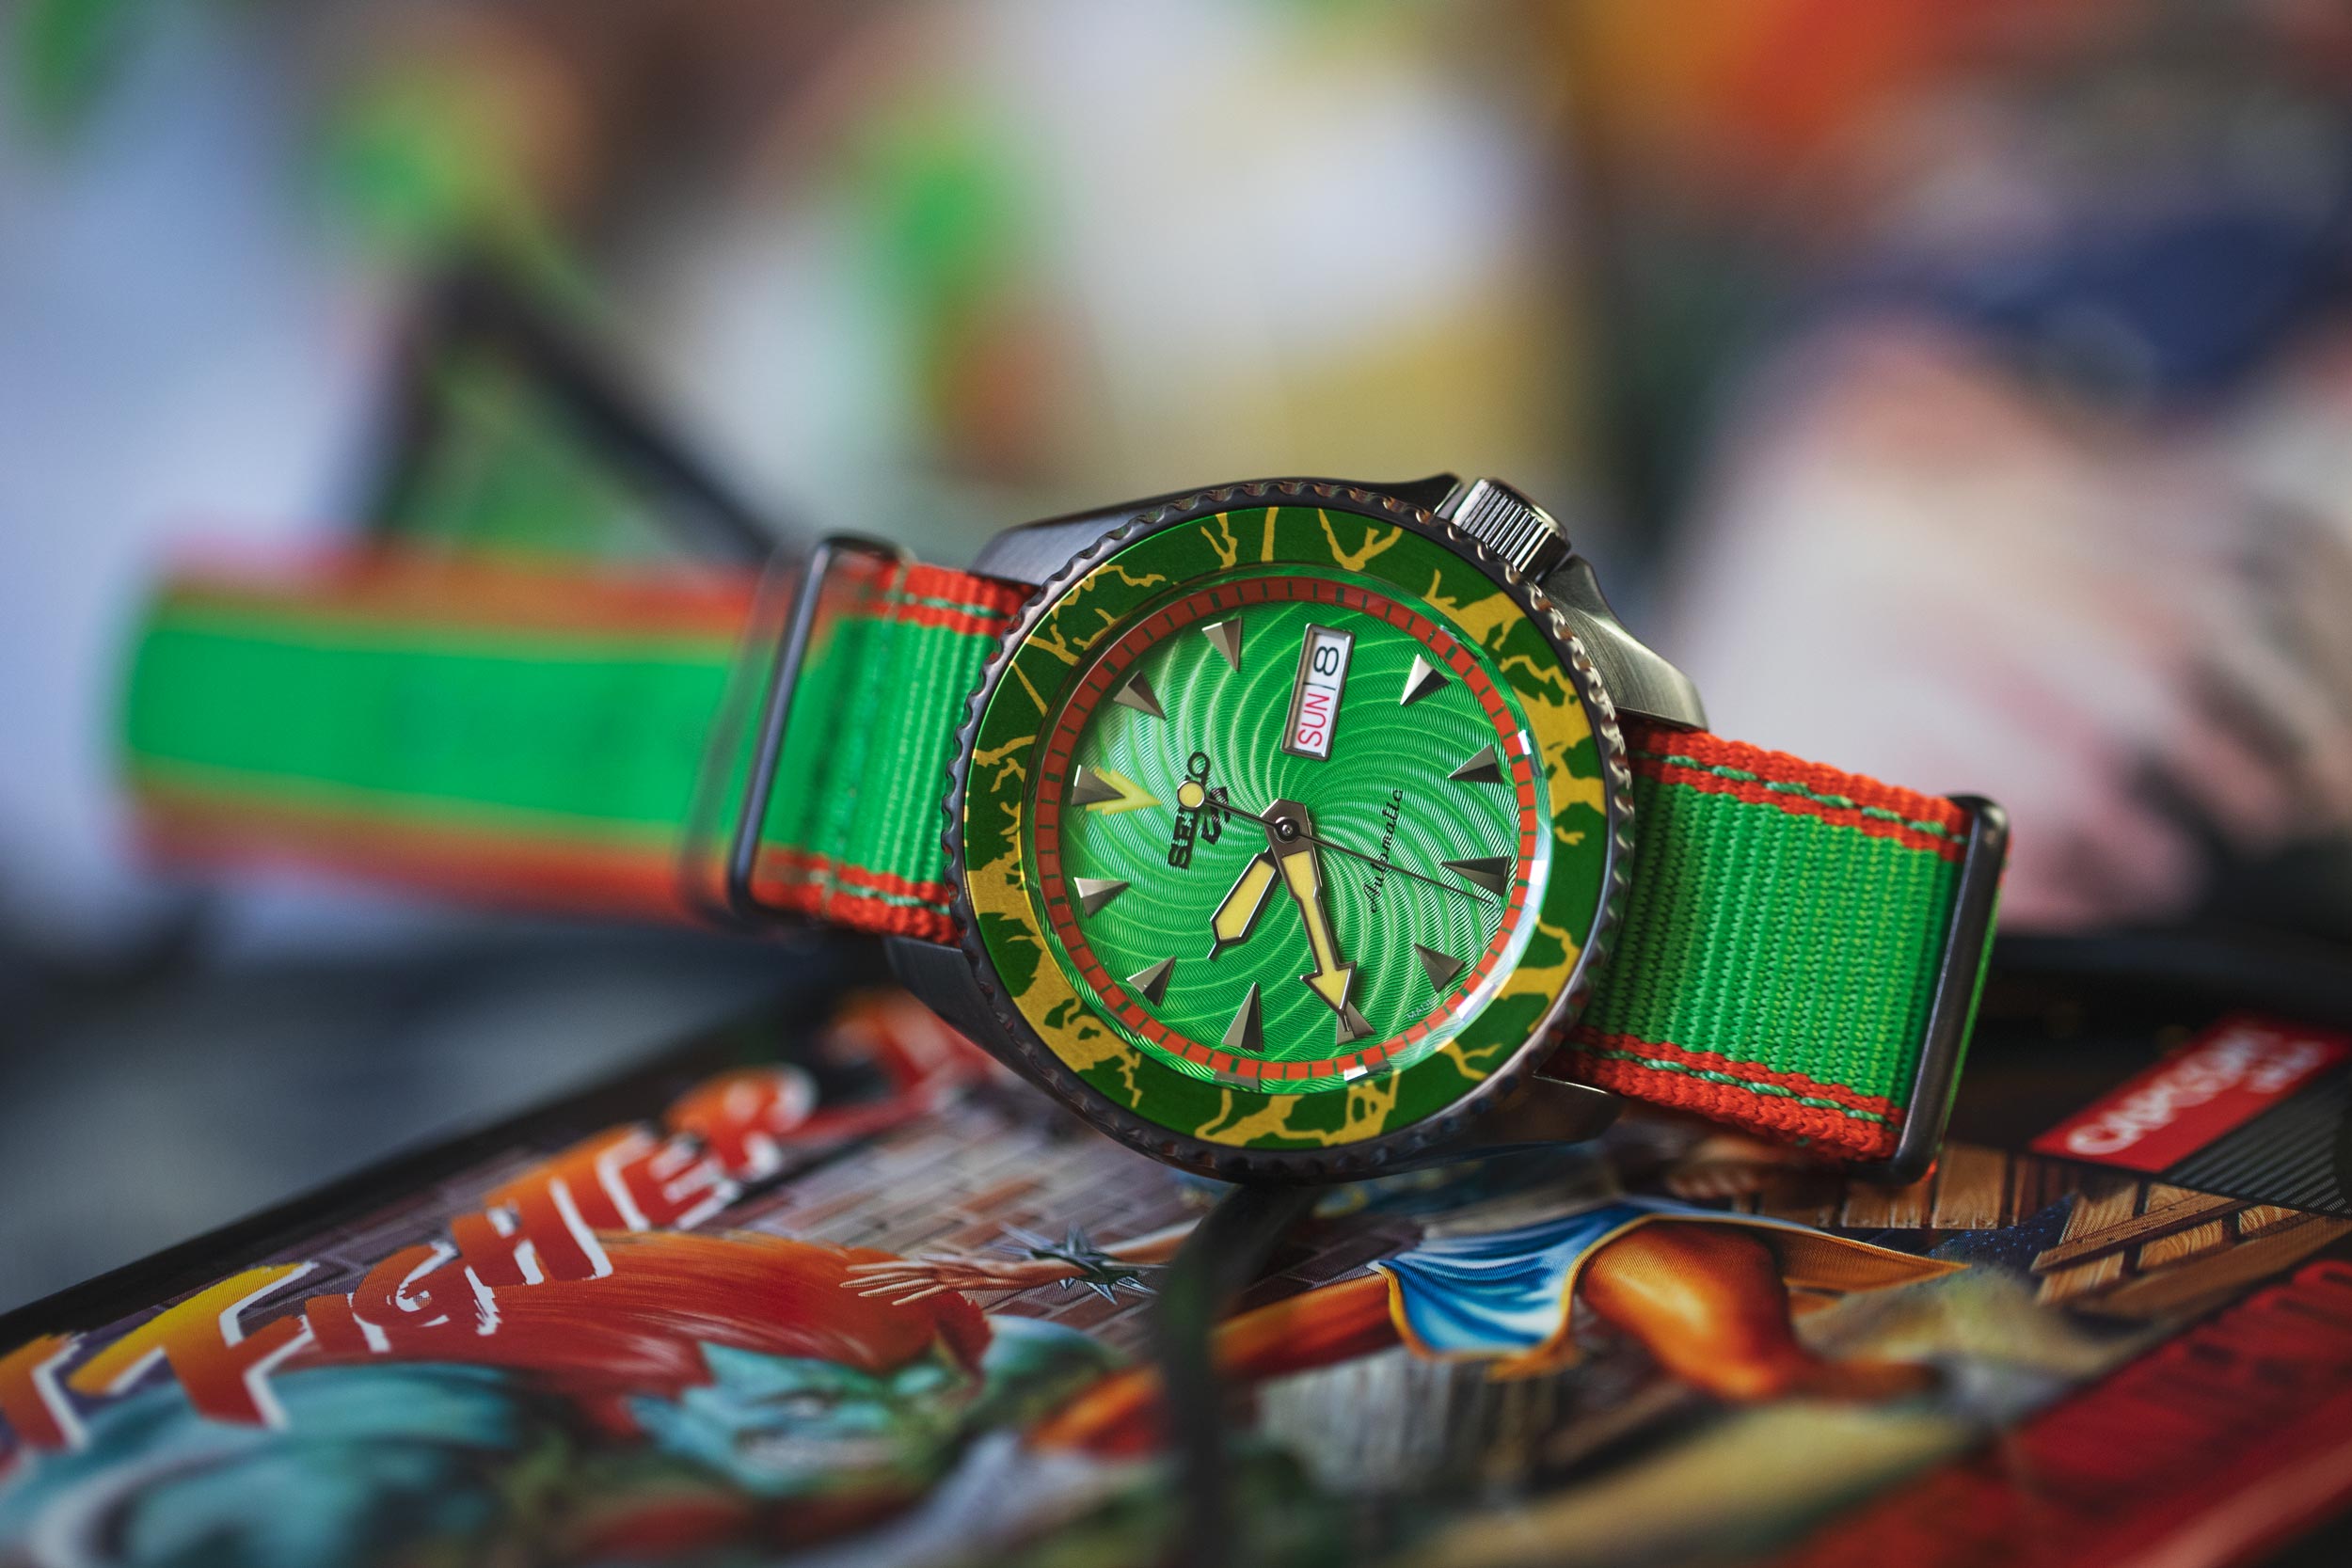 Seiko’s Street Fighter-Inspired Watches Celebrate All the Right Moves